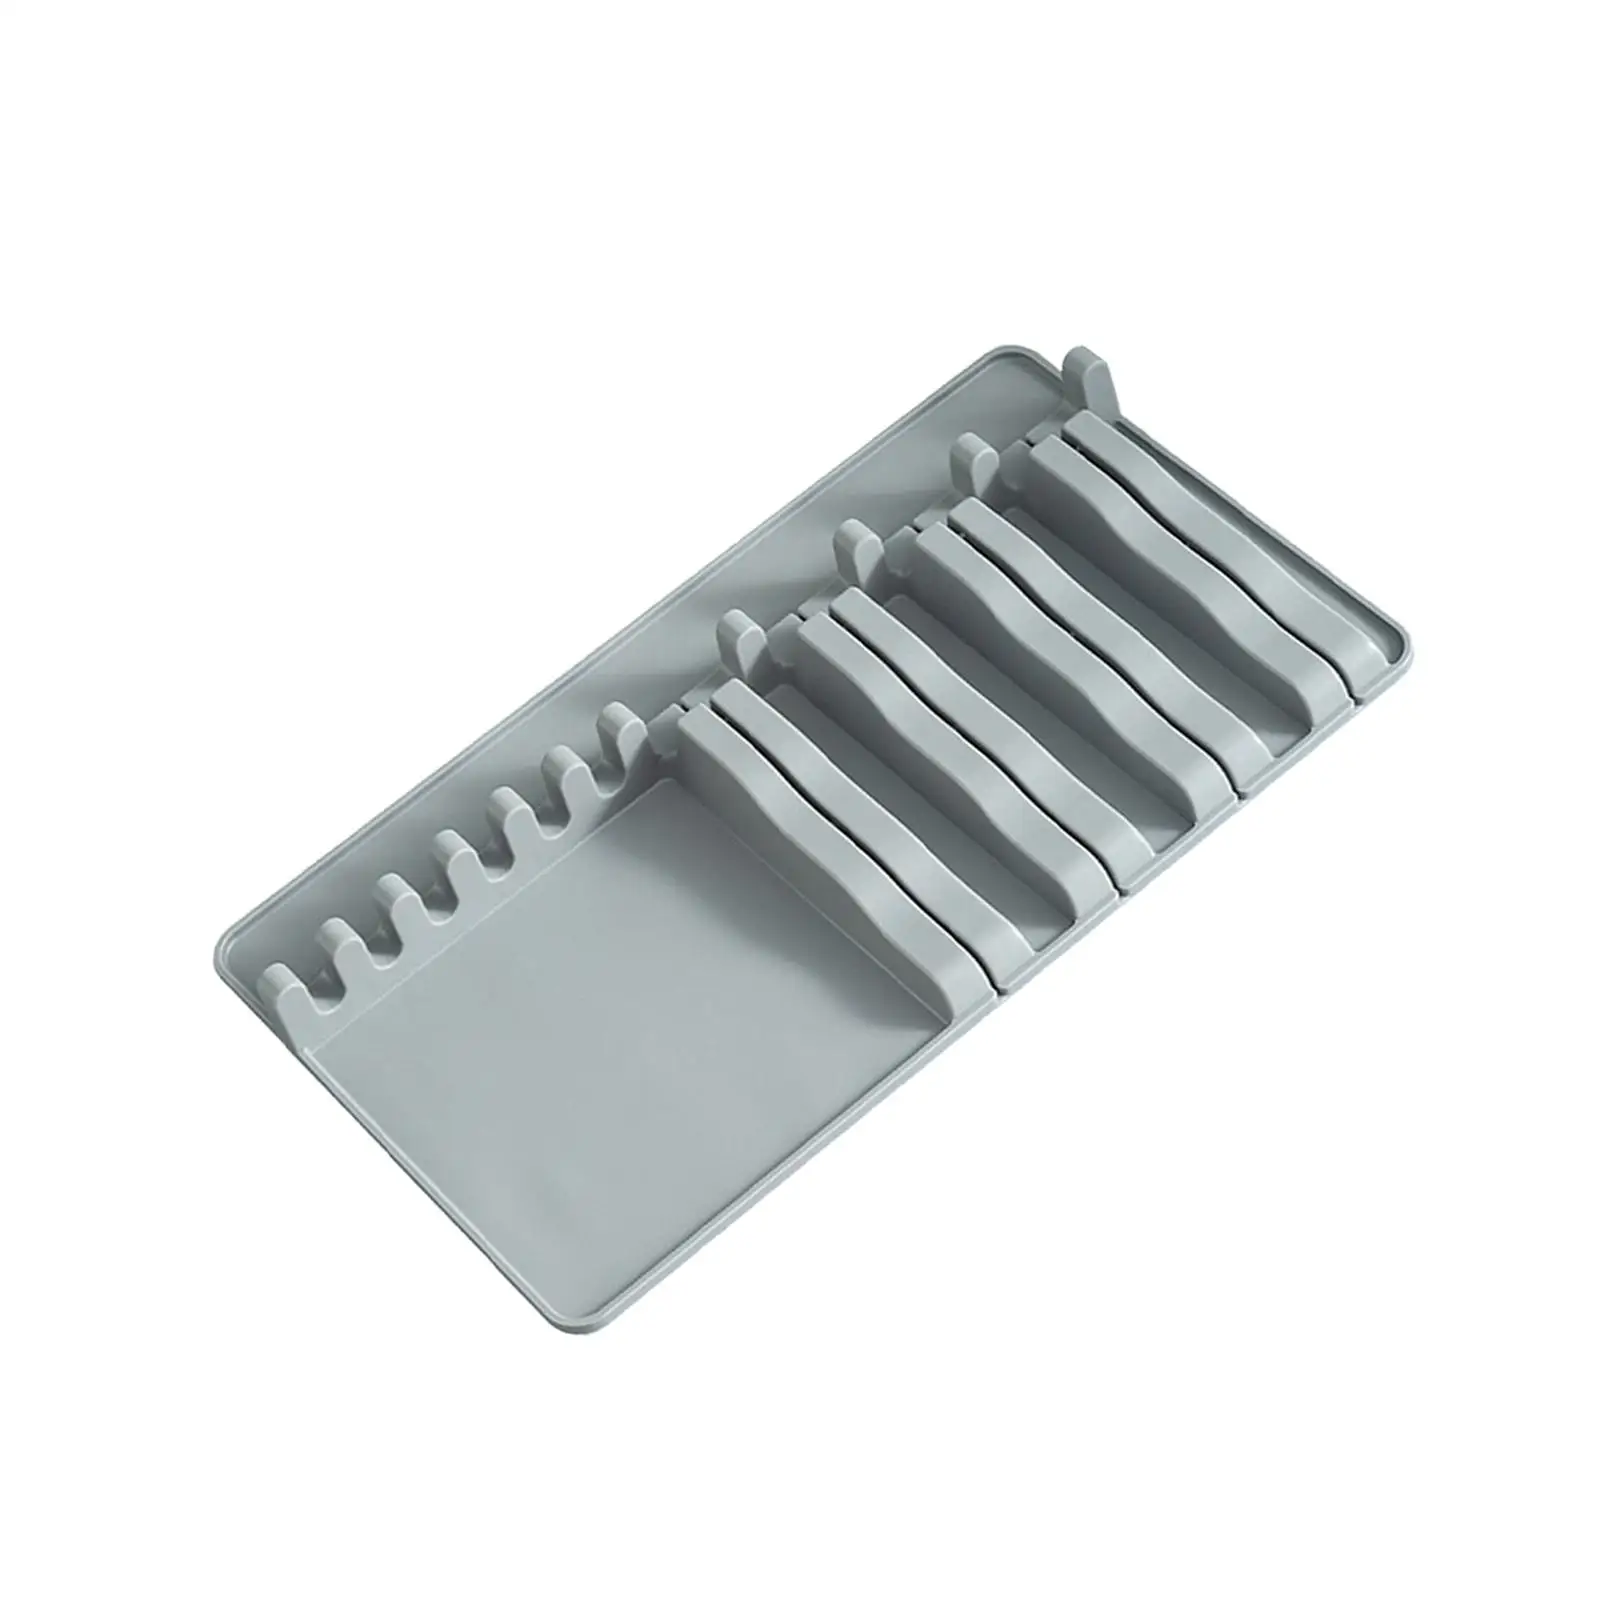 Silicone Knives Spoon Rest Organizer Rack Flexible Material Accessories Gray Color Good Ventilation with Hanging Hole Design